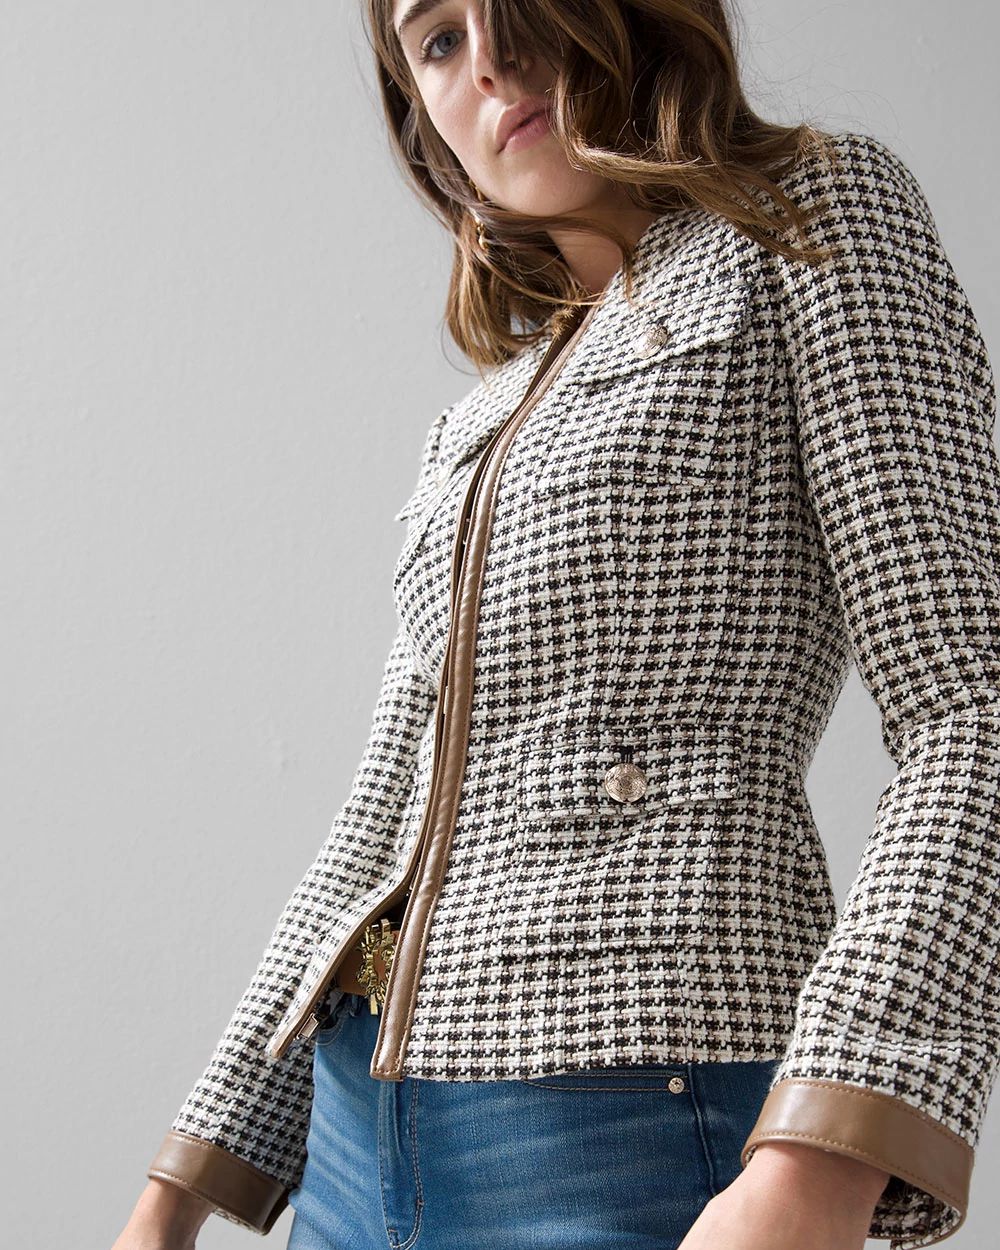 WHBM® Stylist Houndstooth Jacket click to view larger image.